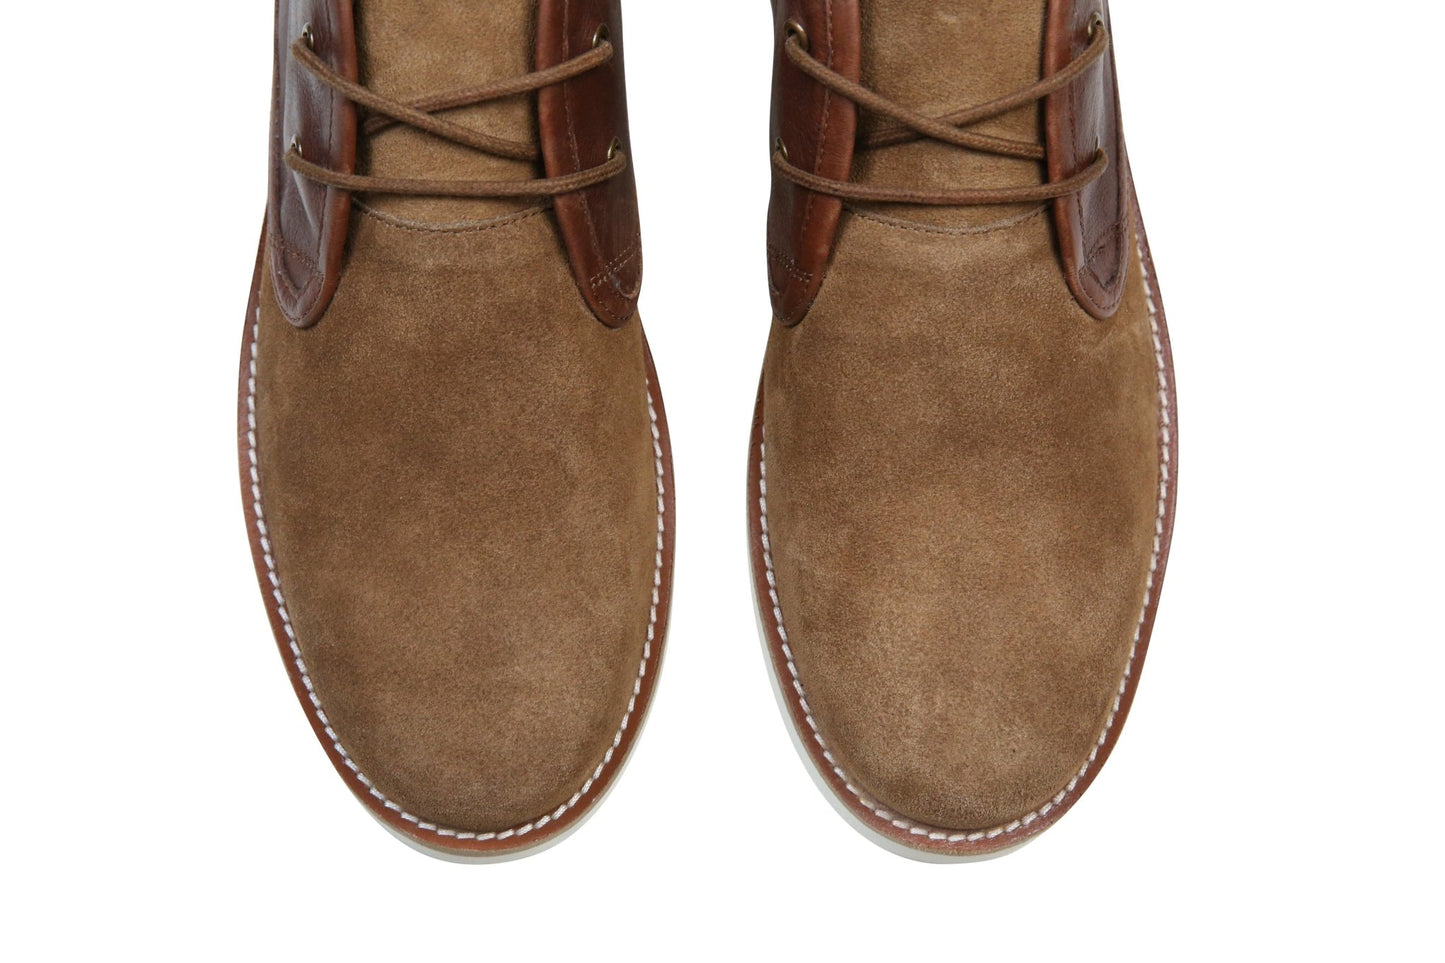 Hound & Hammer "The Nolan" Cognac Leather & Suede Boots - Men - Footwear - Boots - Ankle Boots - Benn~Burry